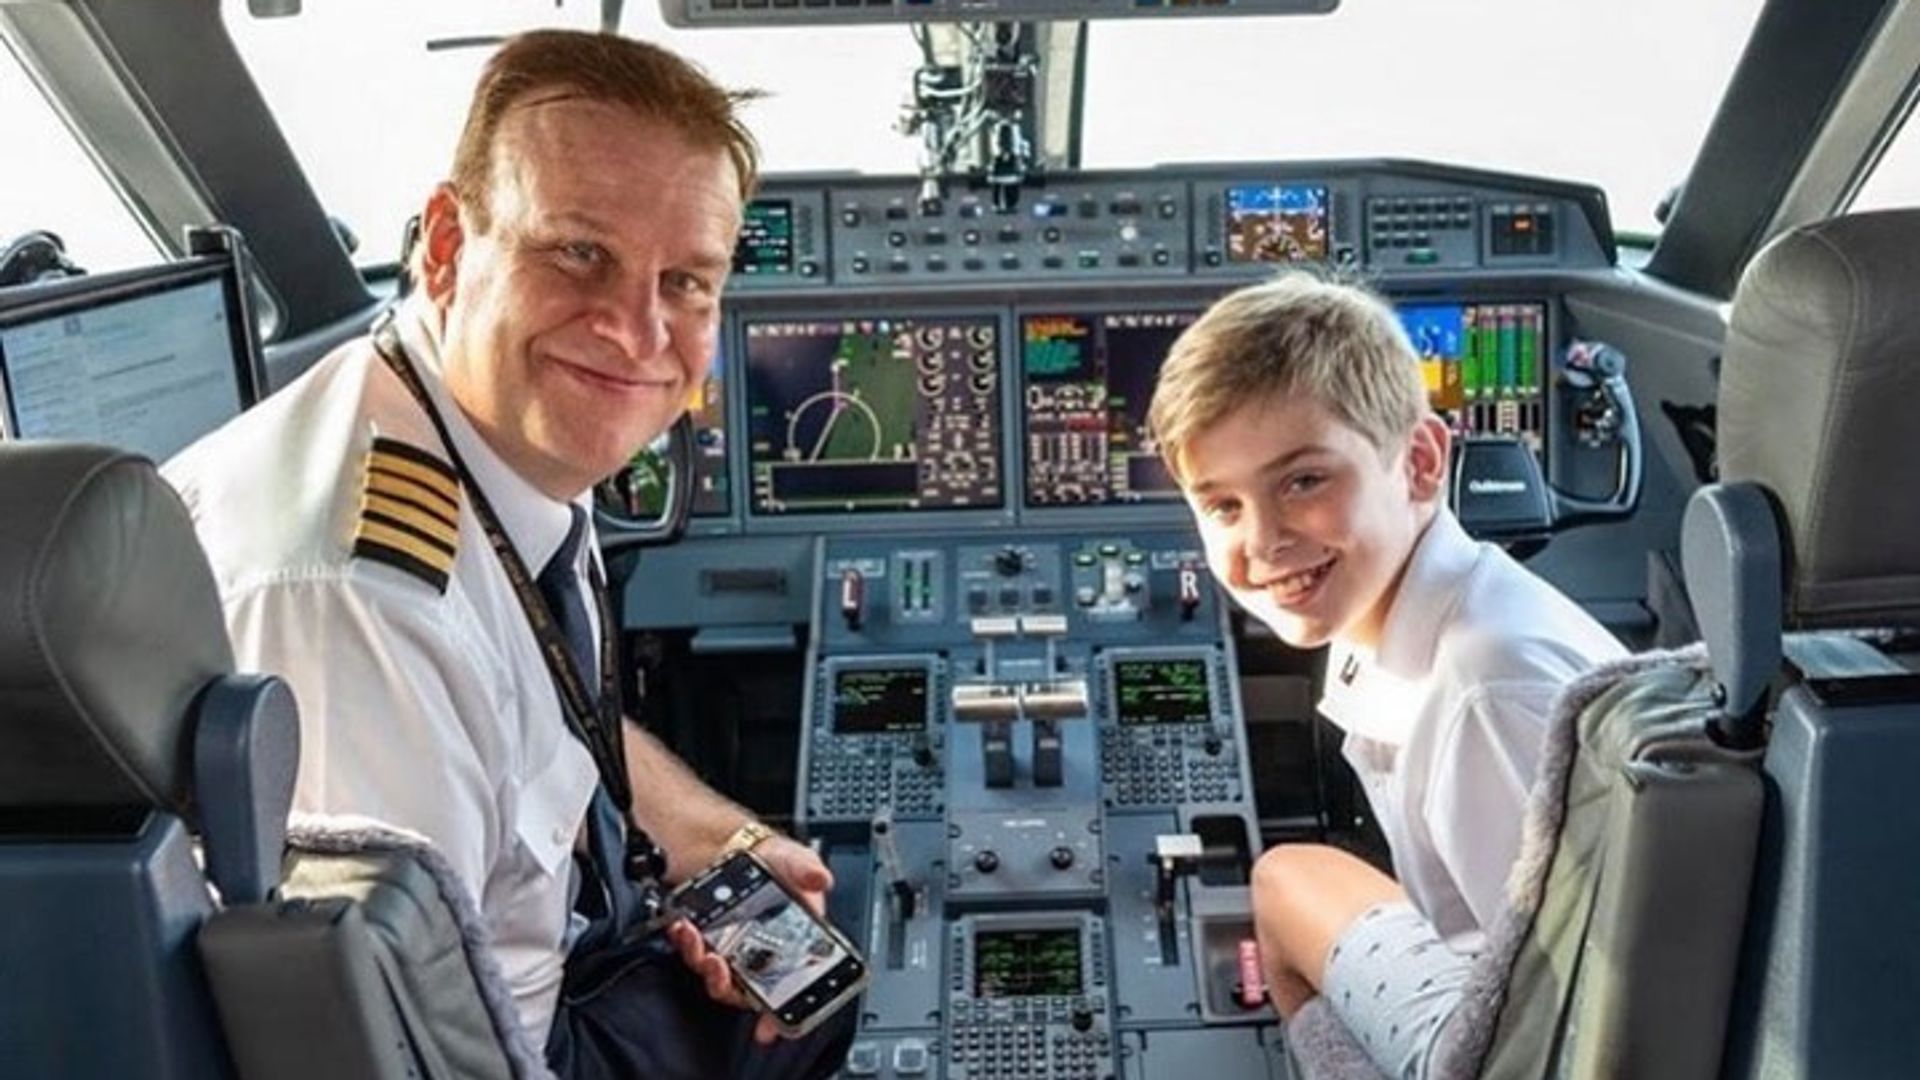 Giles with his dad sat in the pilot's chairs in a plane cockpit